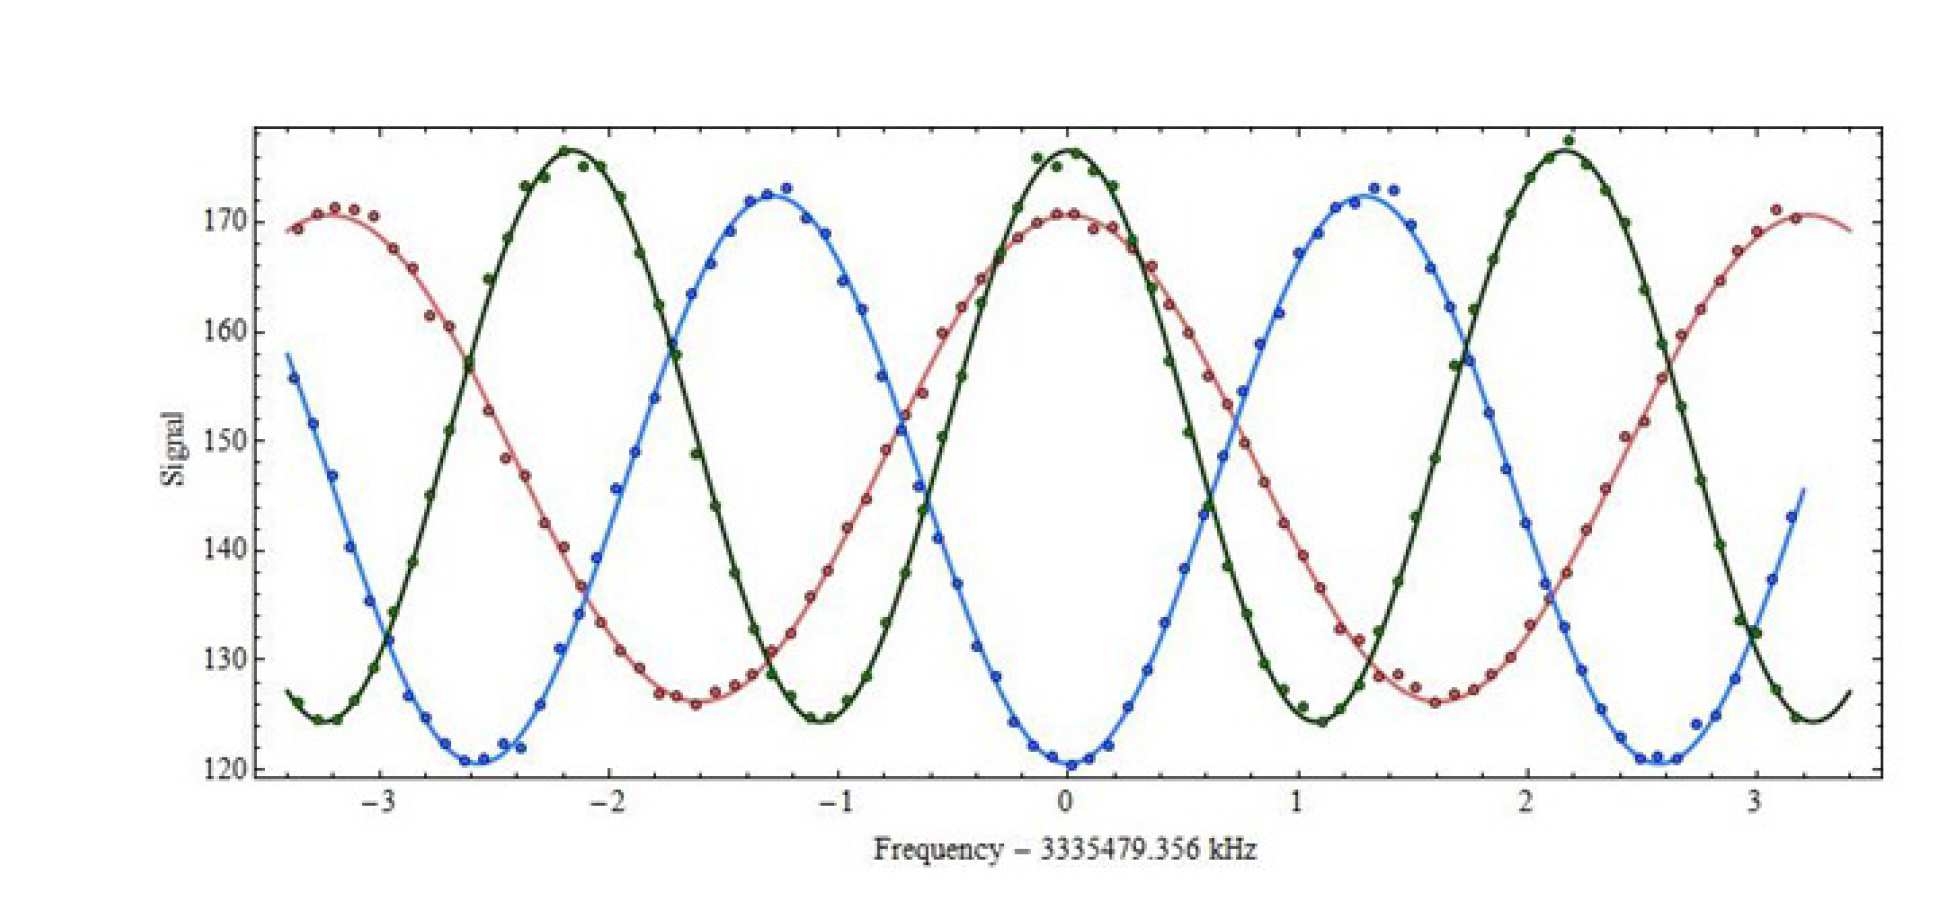 The data shows the Ramsey oscillations in the detected molecule number as the frequency of the microwaves is varied. There are three datasets corresponding to three different free evolution times between the two microwave pulses.